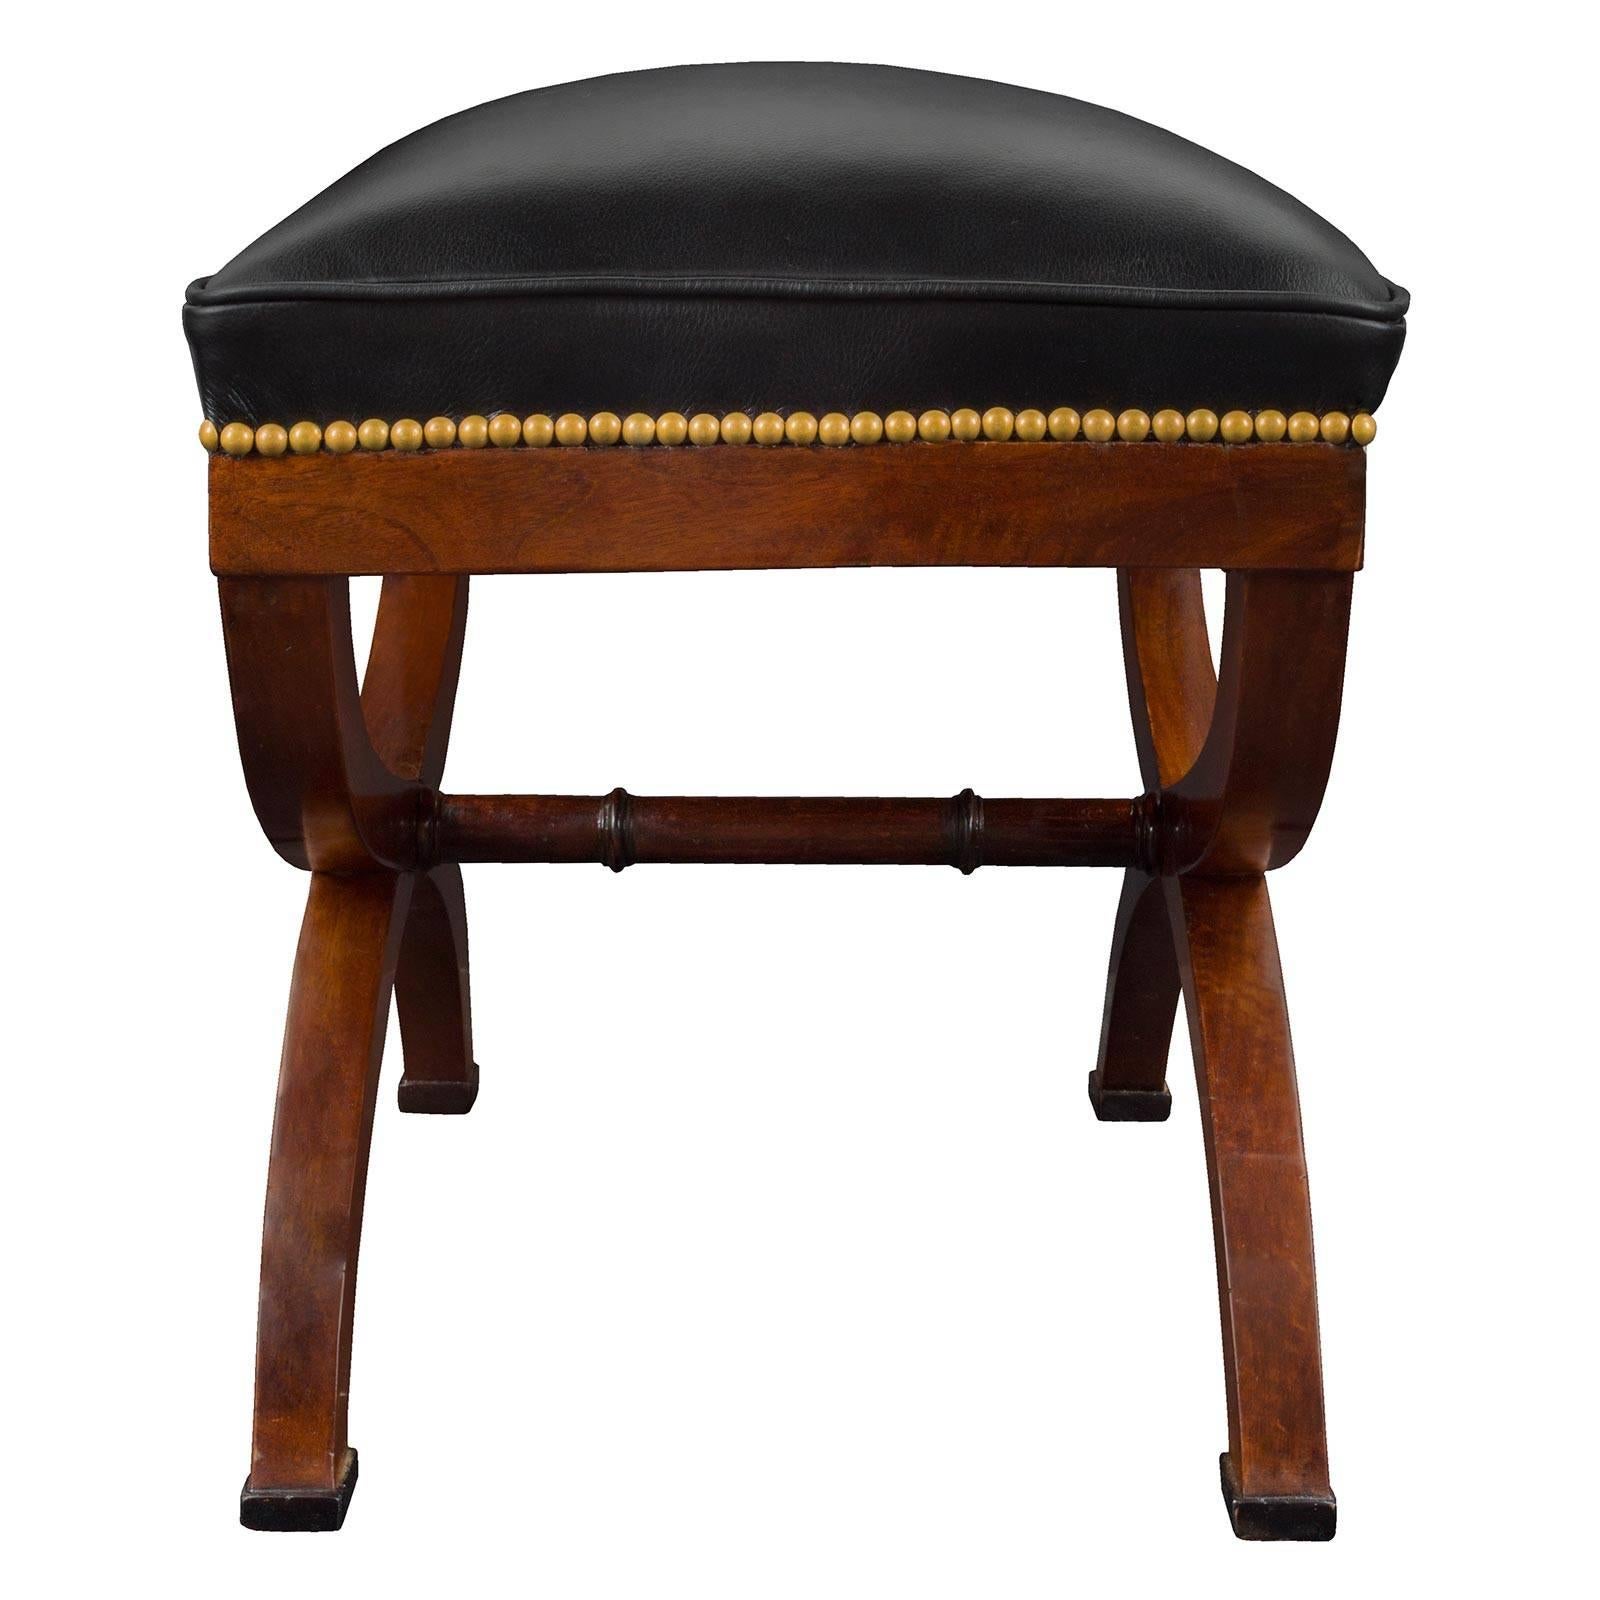 A handsome pair of French early 19th century neoclassical style mahogany and ebony benches. Each rectangular bench is raised on ebony blocks below mahogany ’scrolled legs. The supports are joined by an attractive central turned stretcher. The